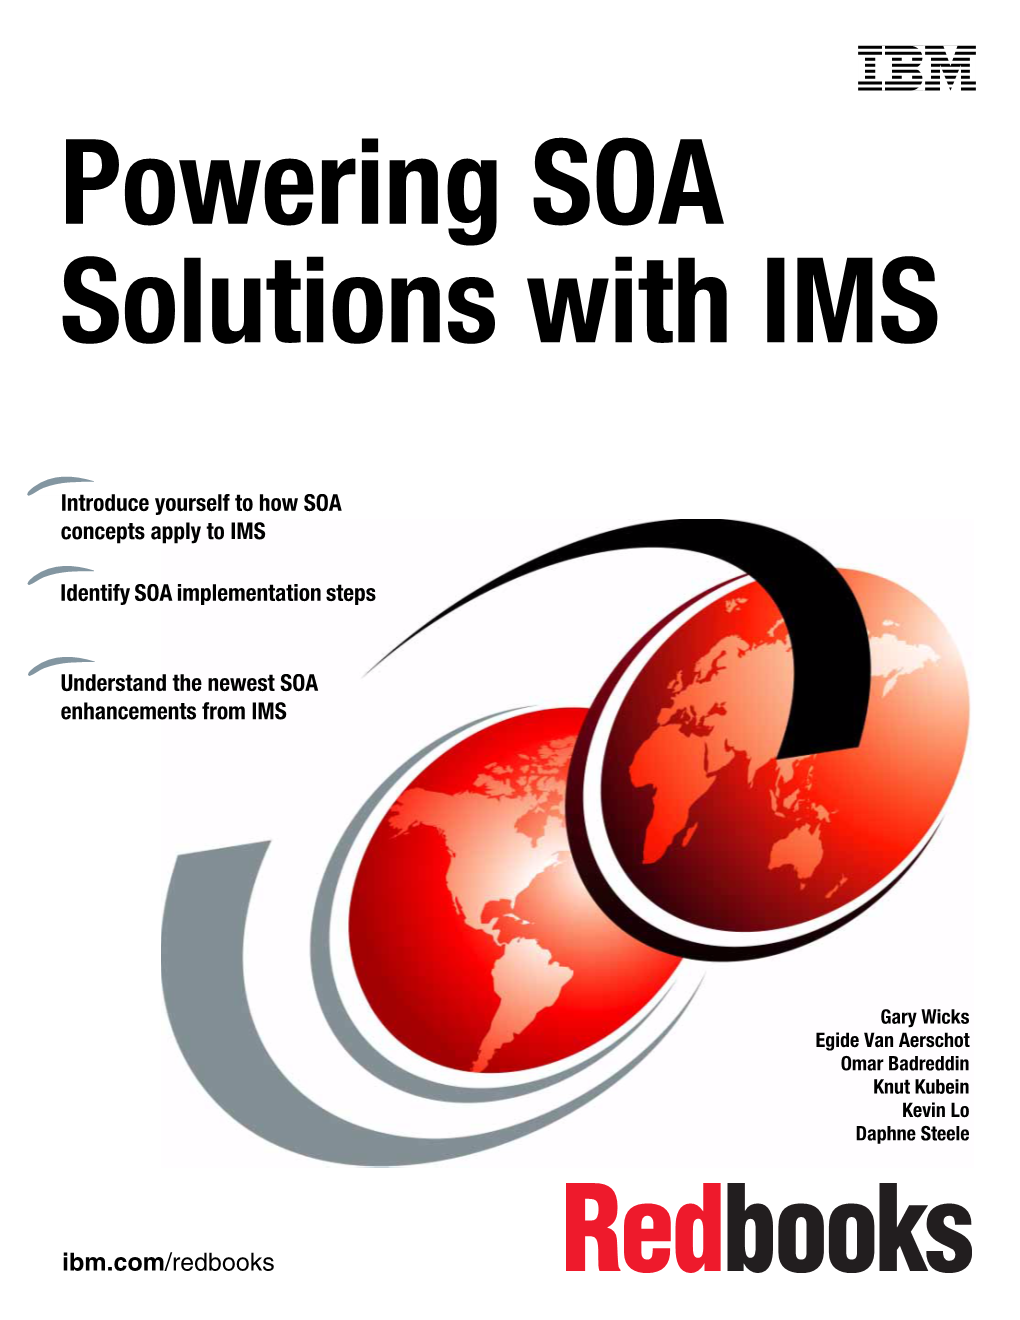 Powering SOA Solutions with IMS